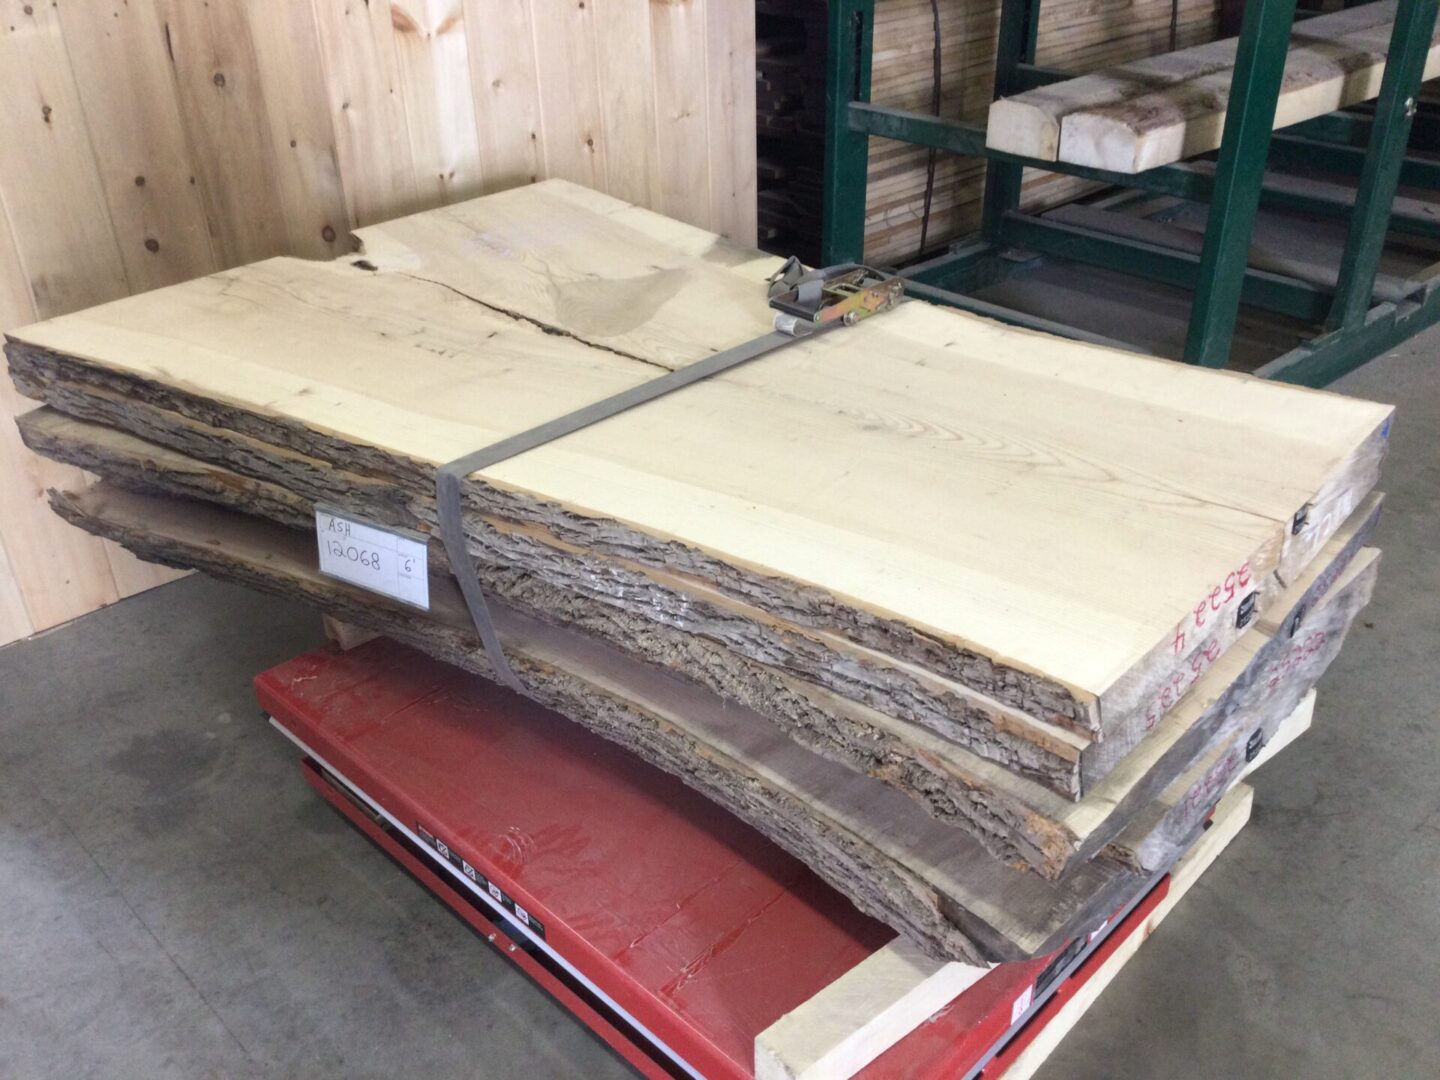 wood slabs neatly organized on top of a red pallet